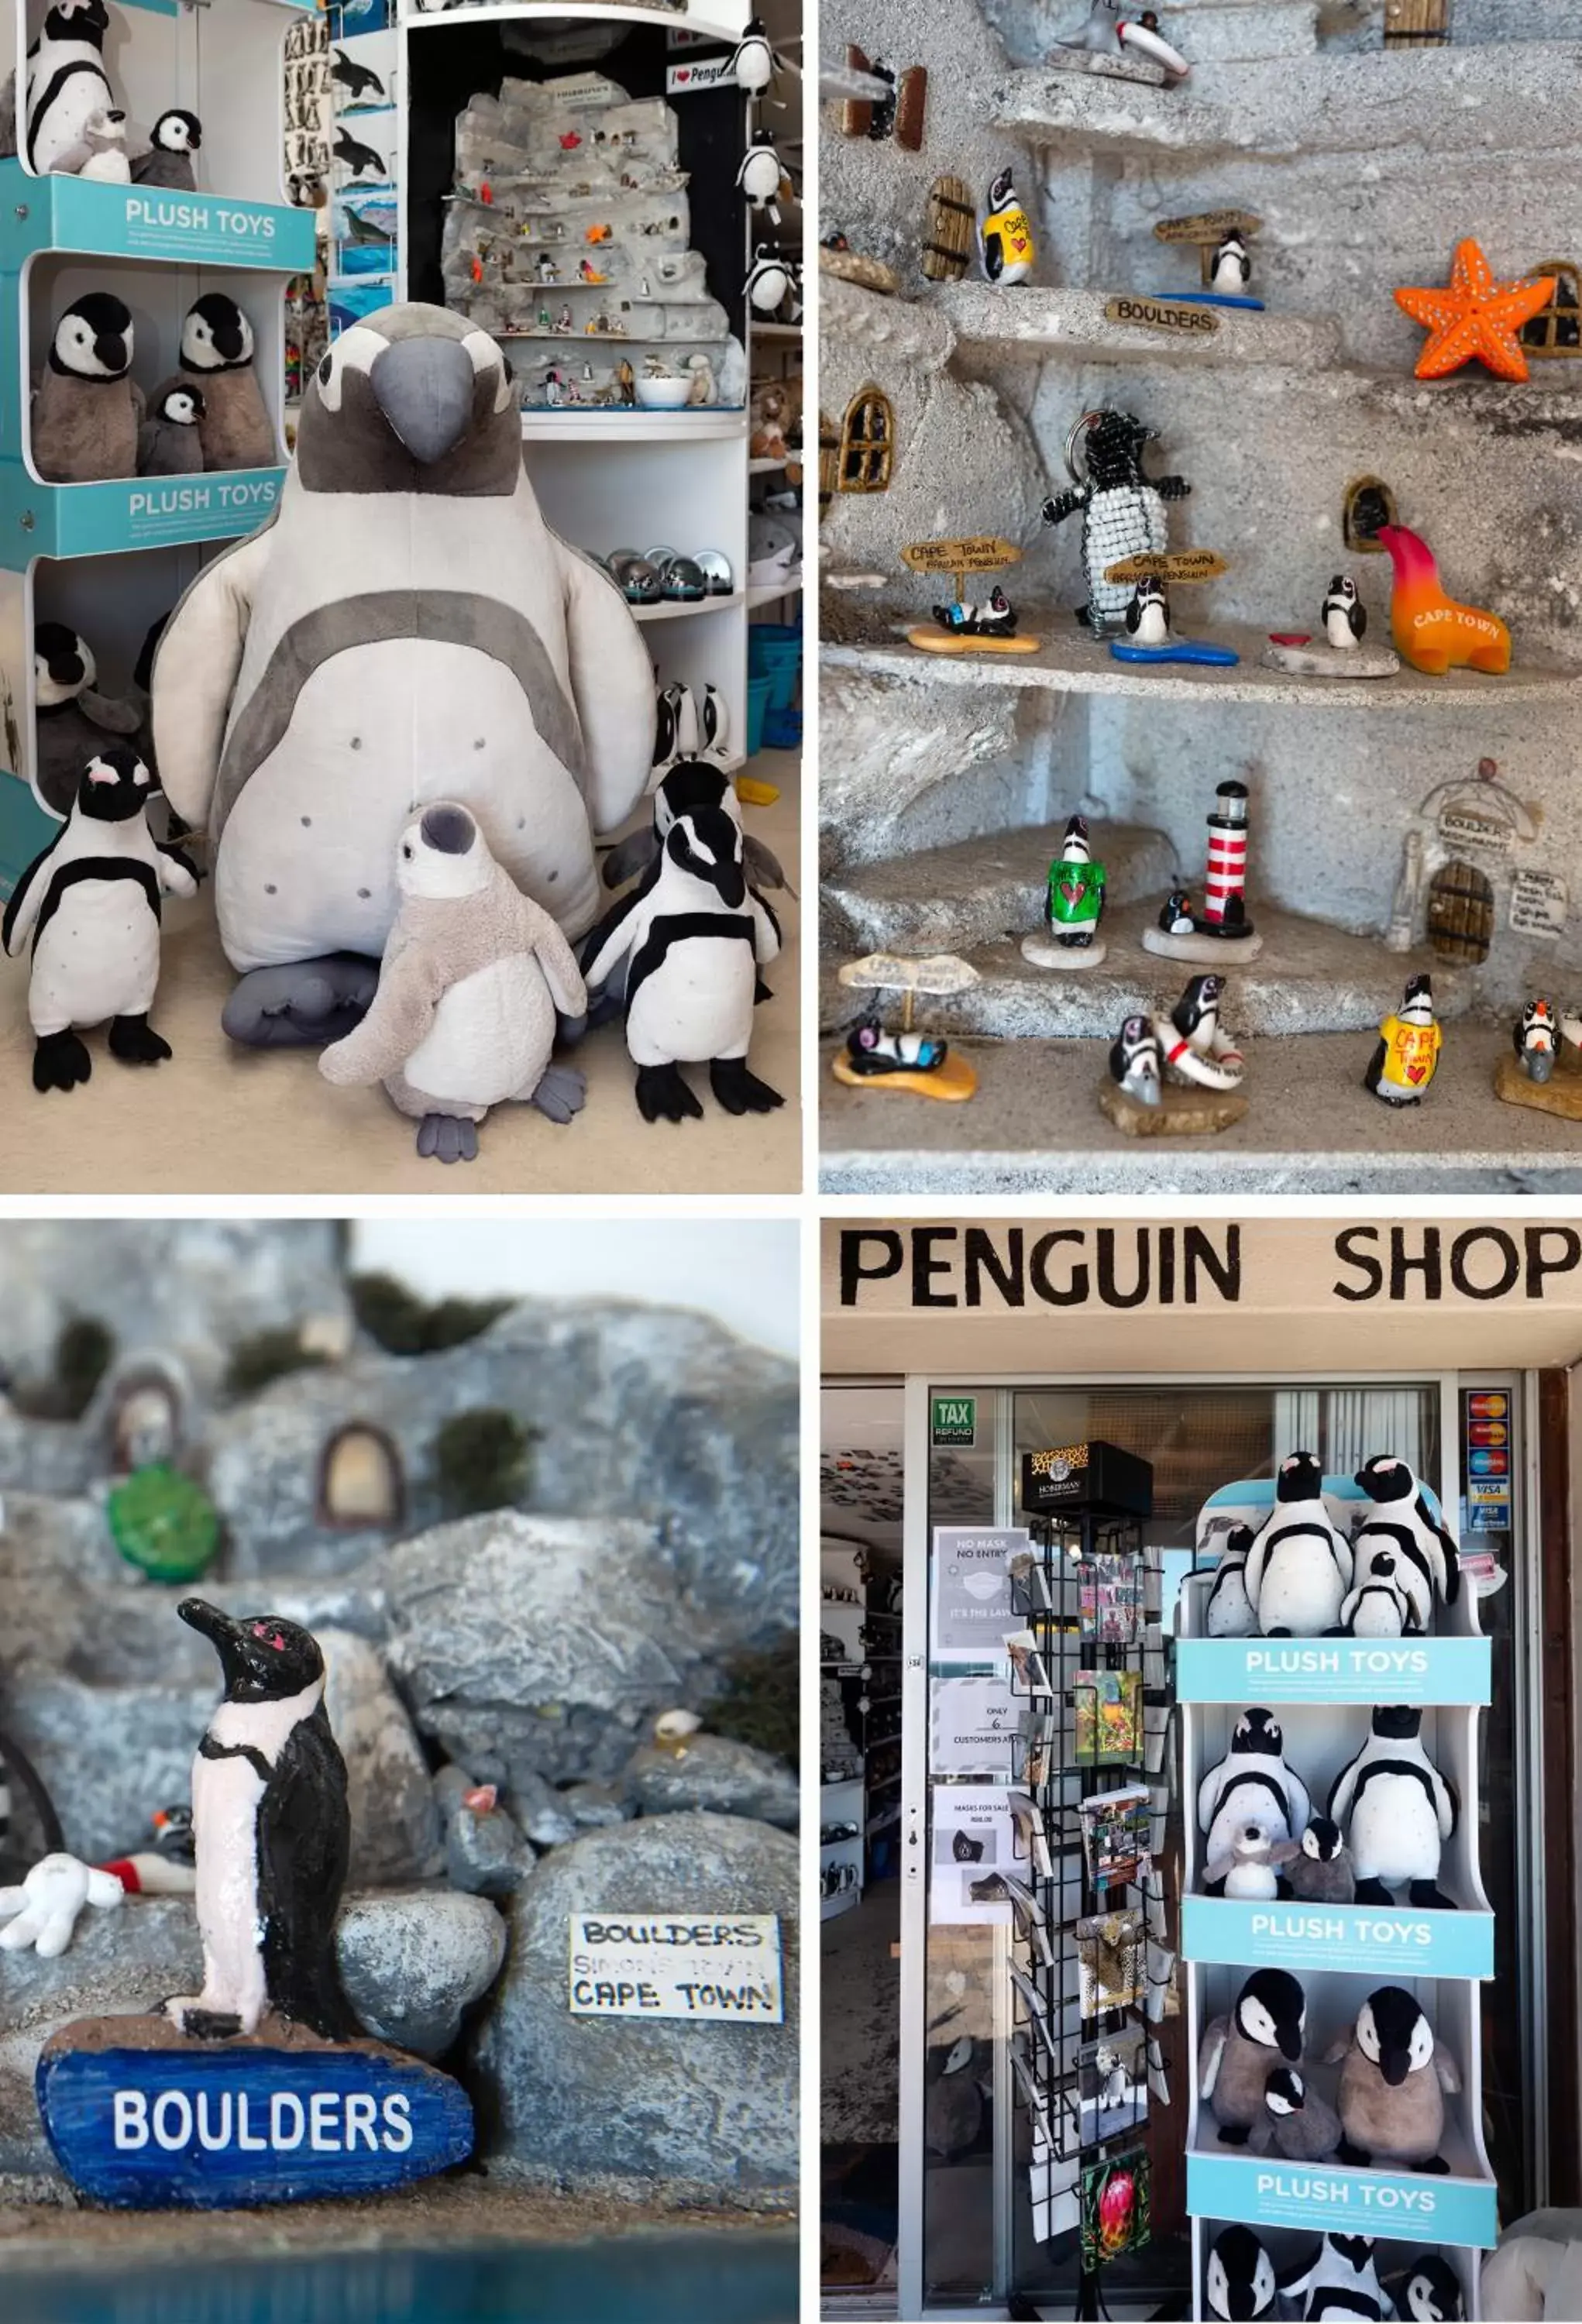 On-site shops in Boulders Beach Hotel, Cafe and Curio shop